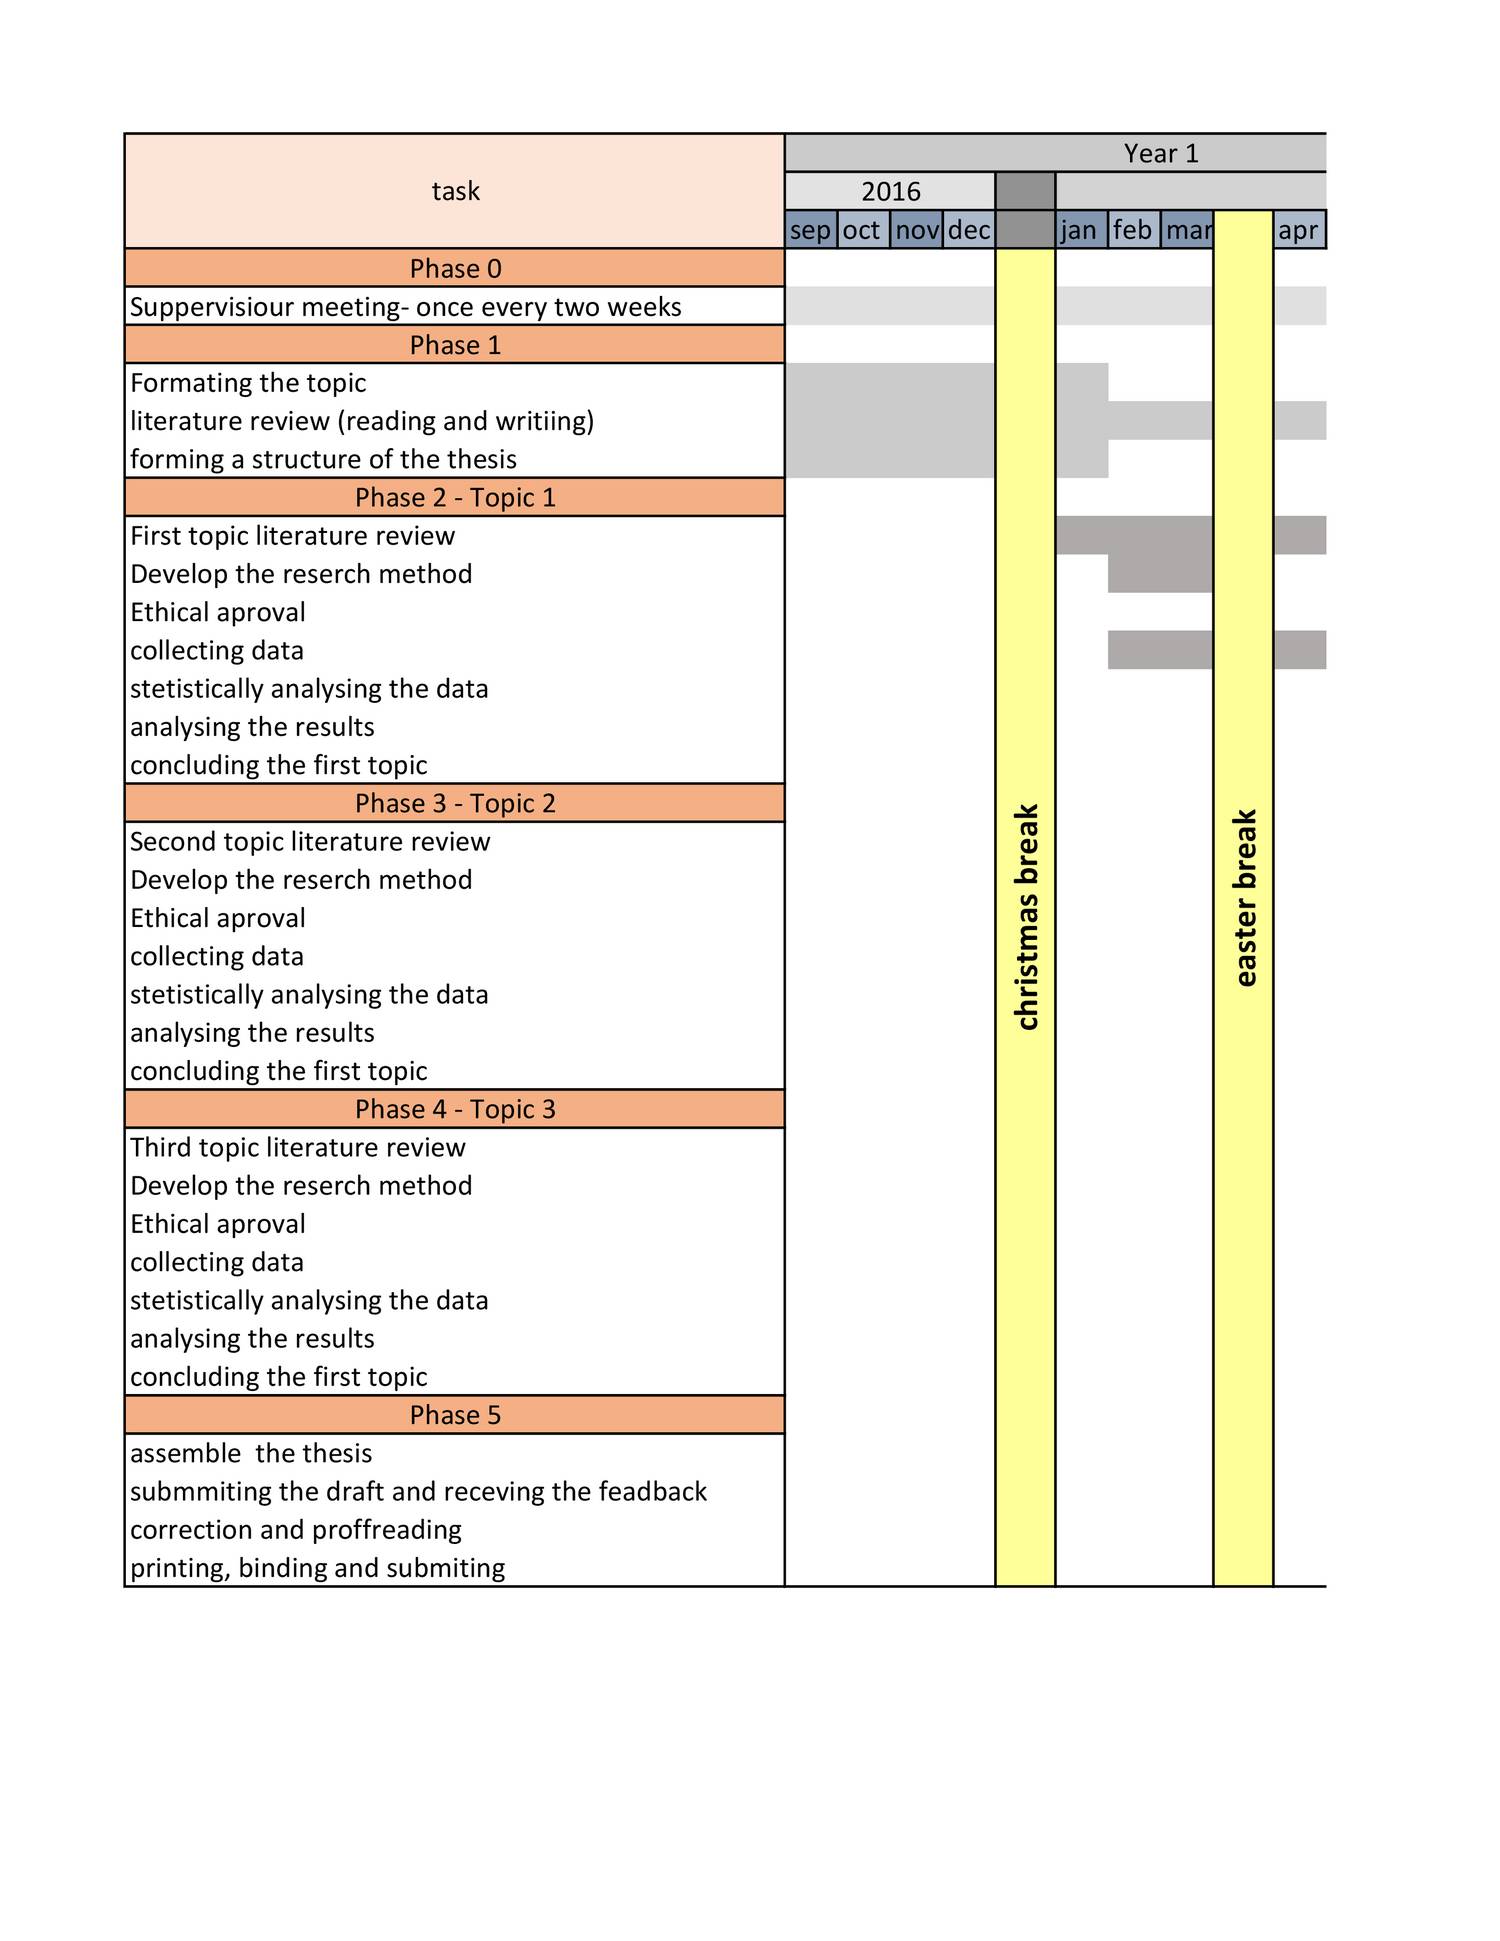 phd timeline template excel